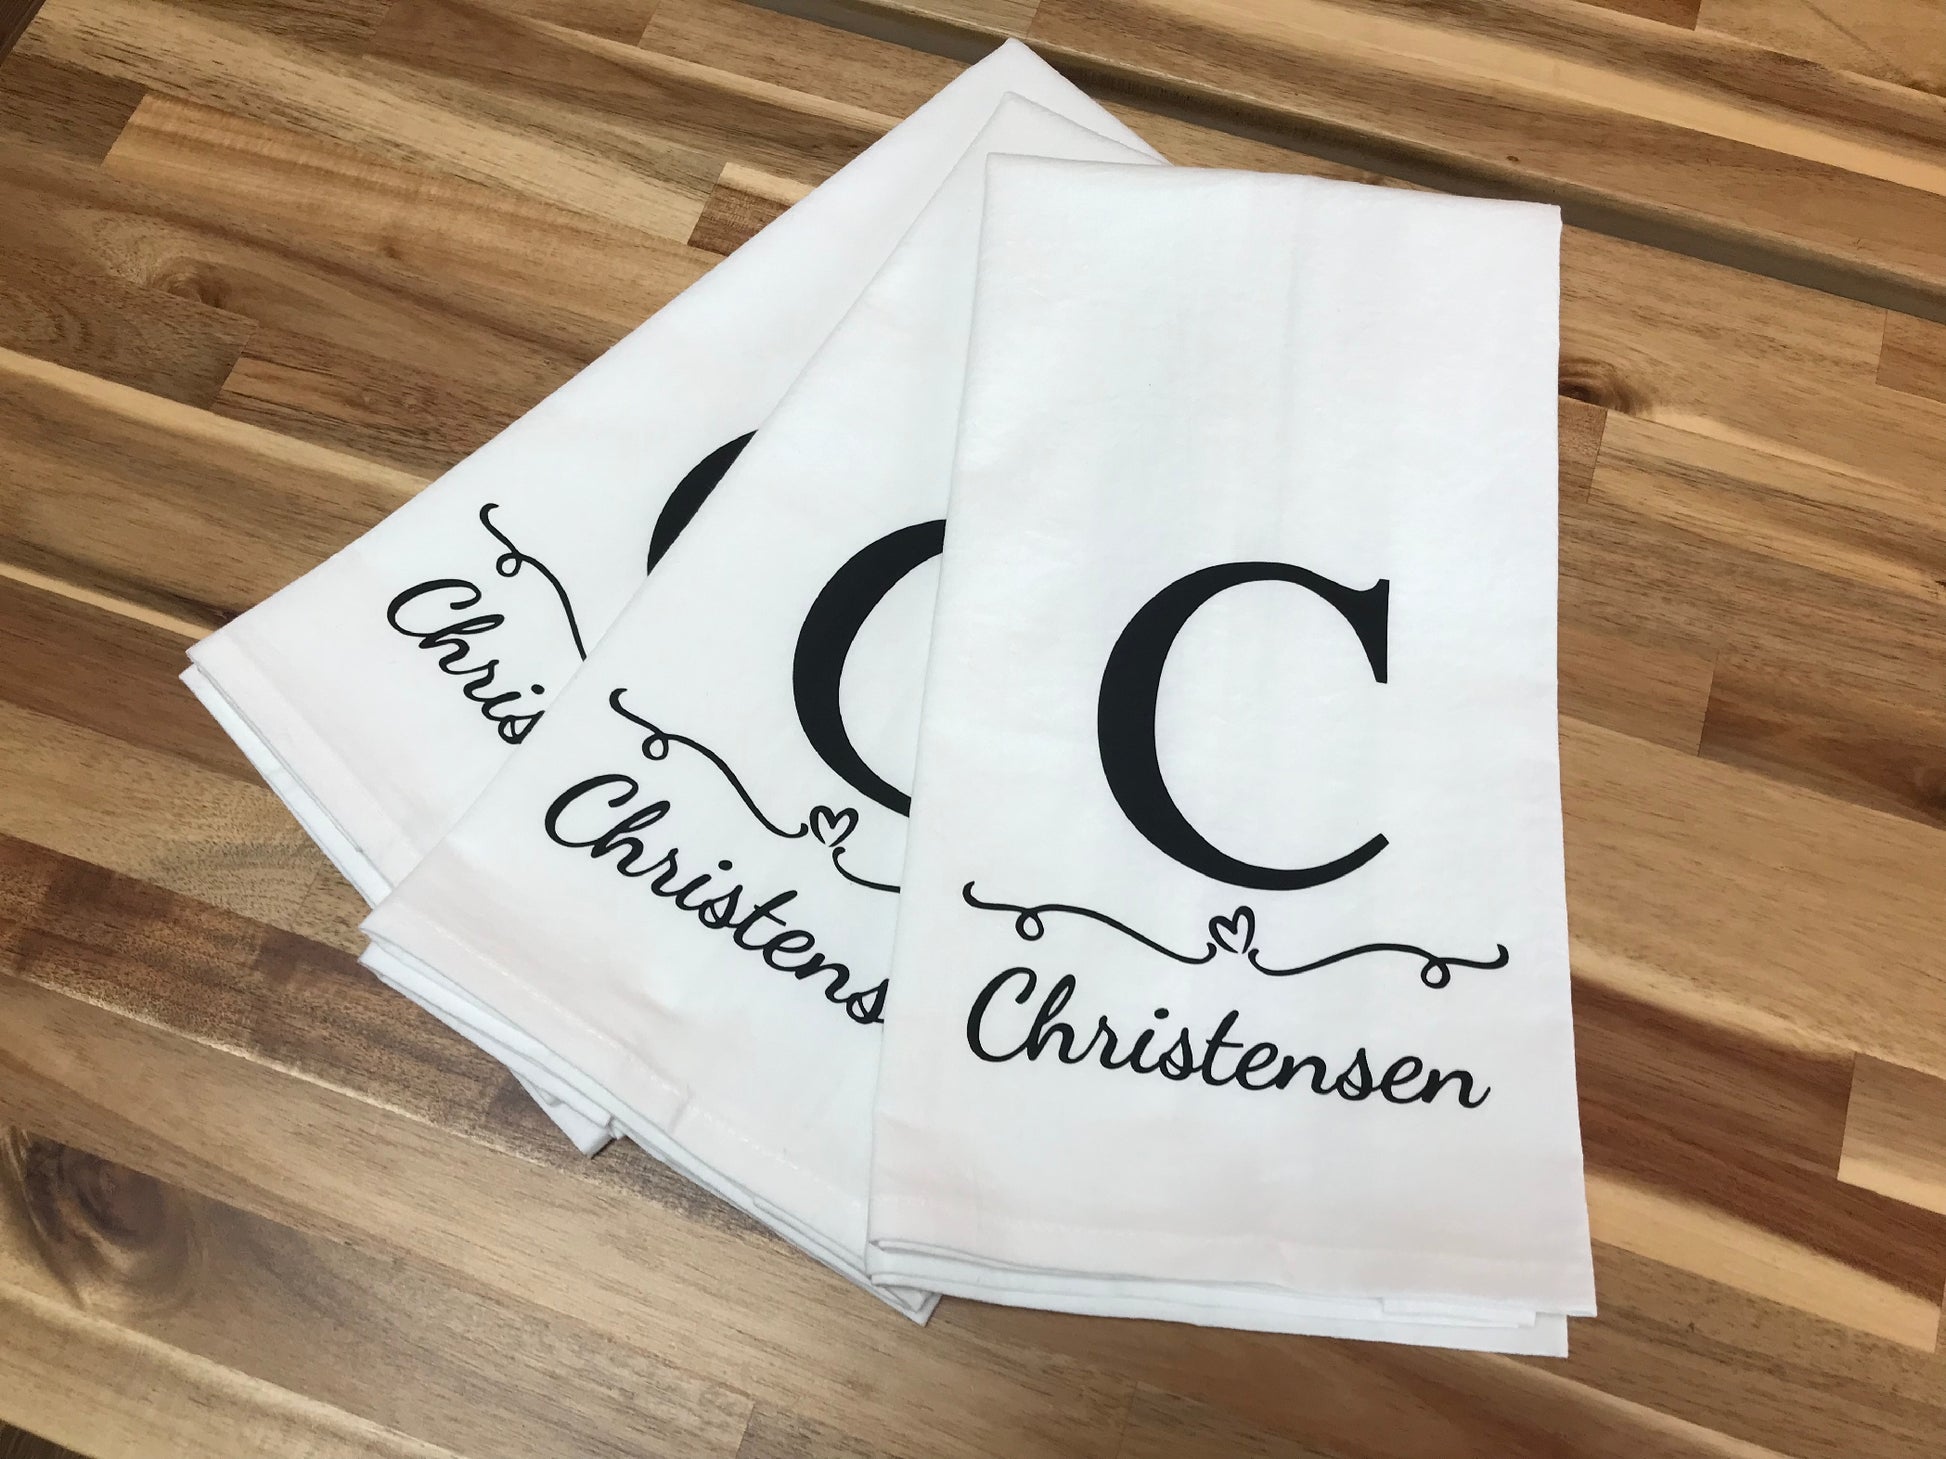 Personalized Flour Sack Tea Towels with Photo